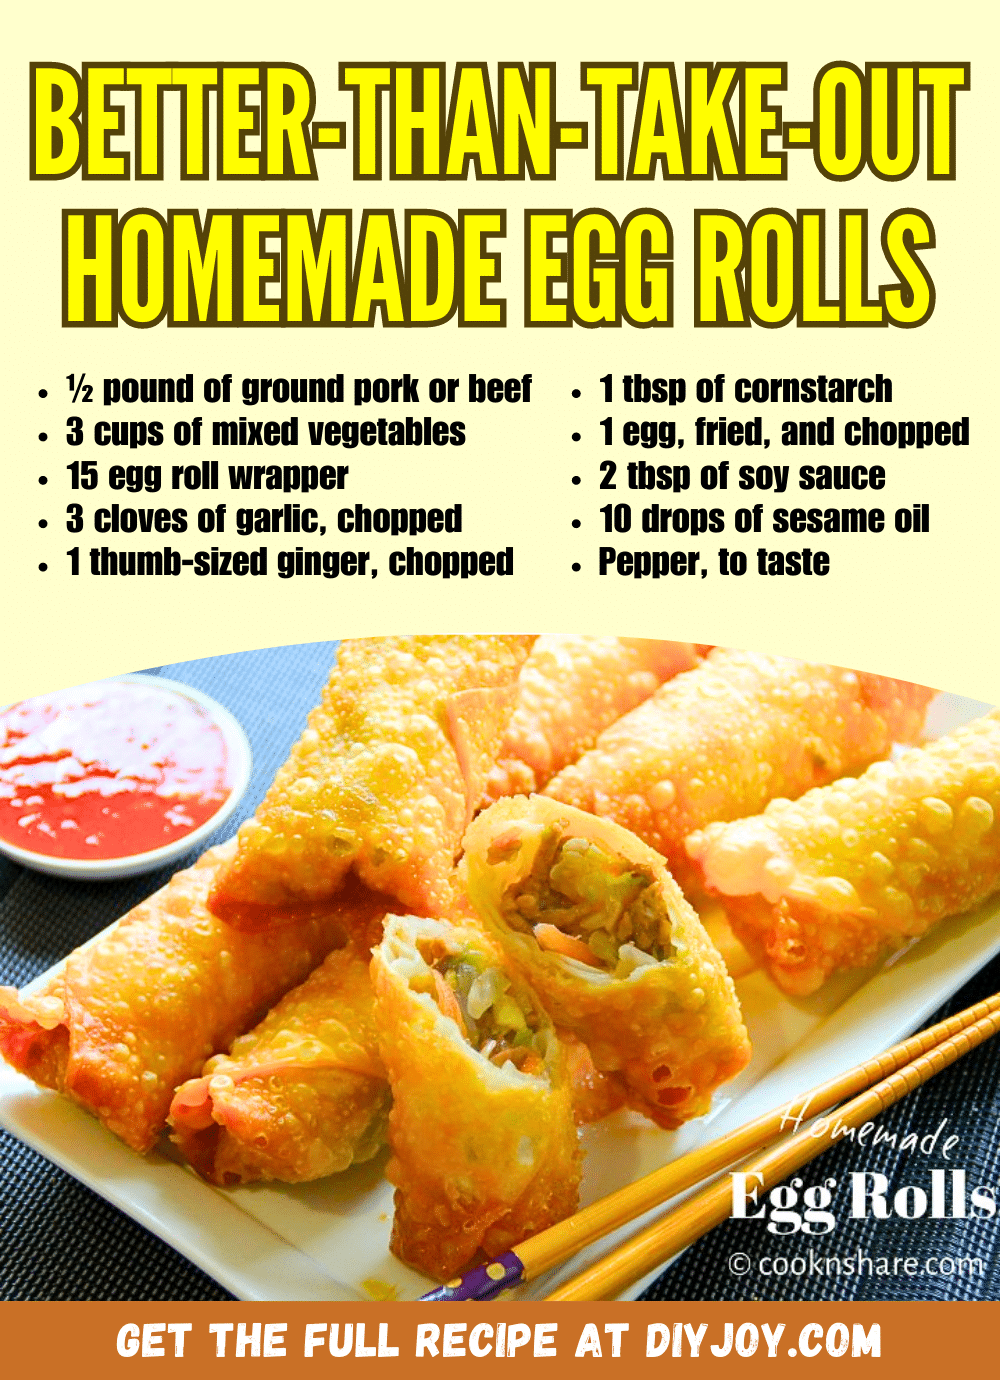 Better-Than-Take-Out Homemade Egg Rolls Recipe